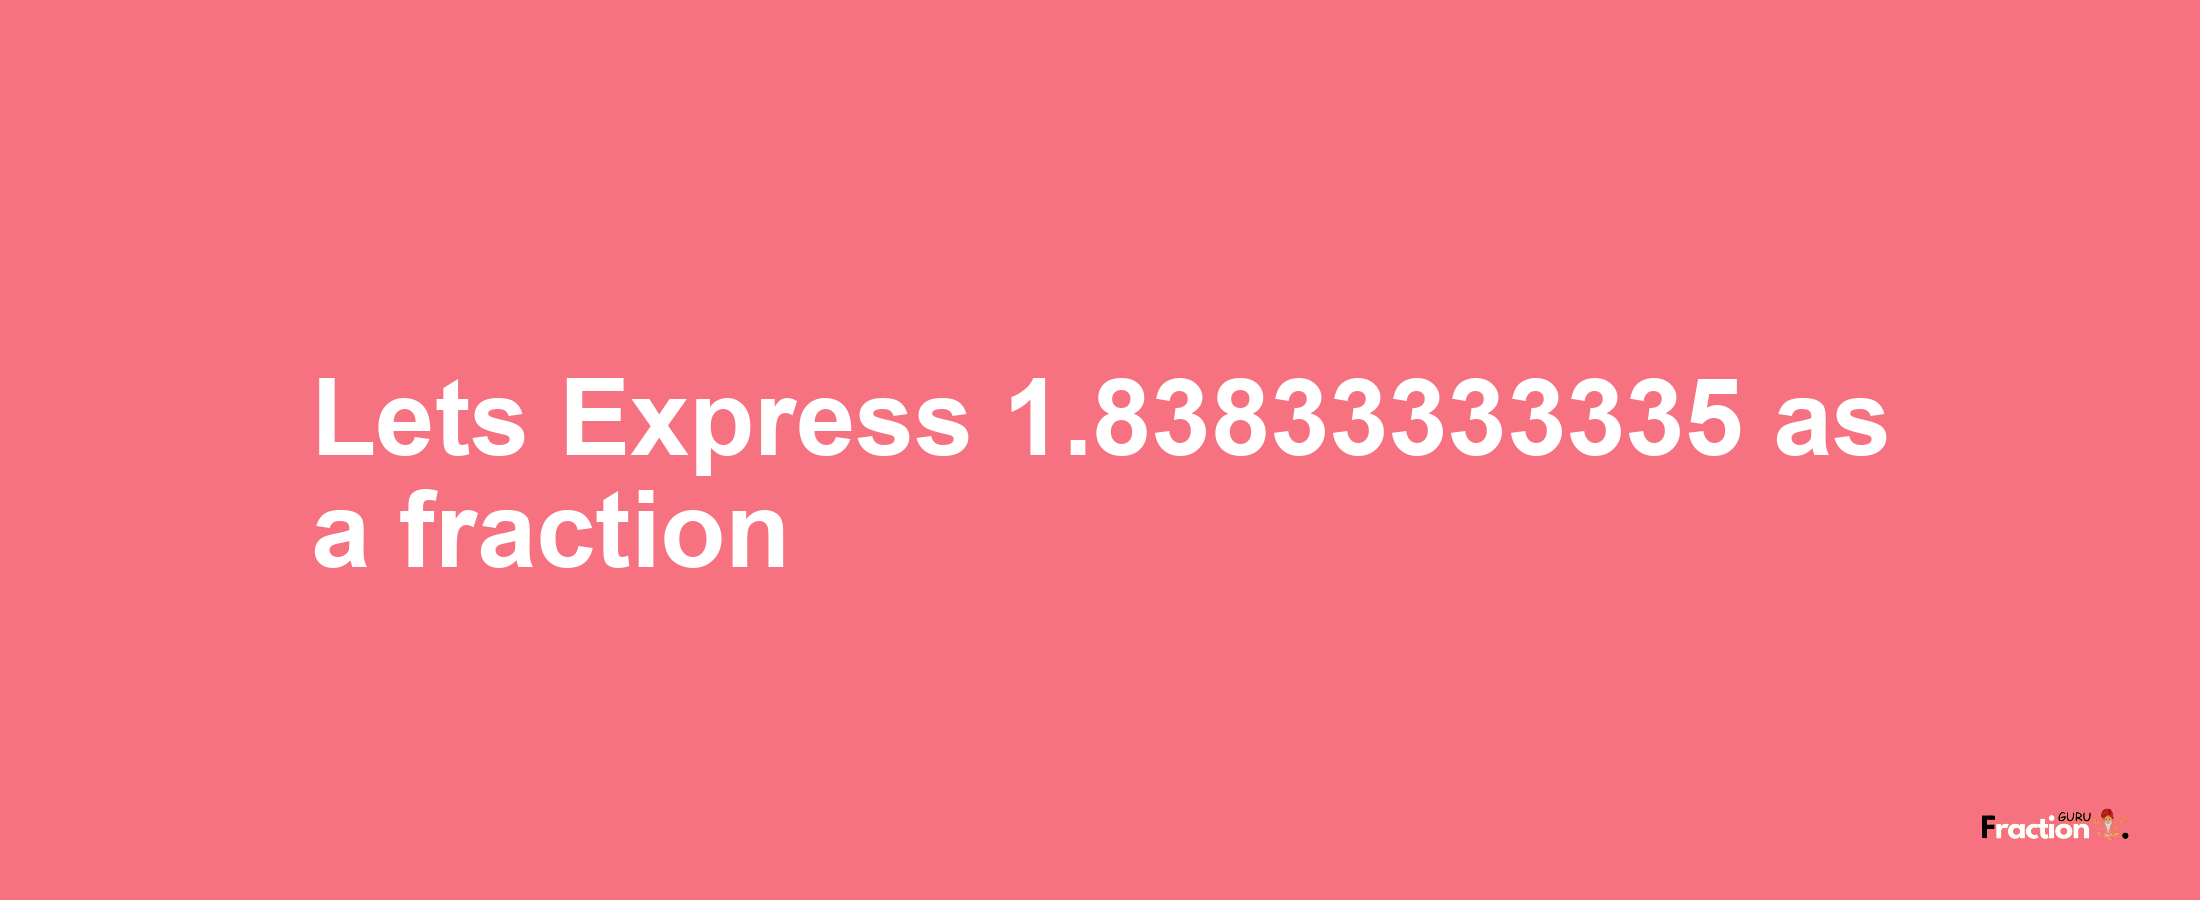 Lets Express 1.83833333335 as afraction